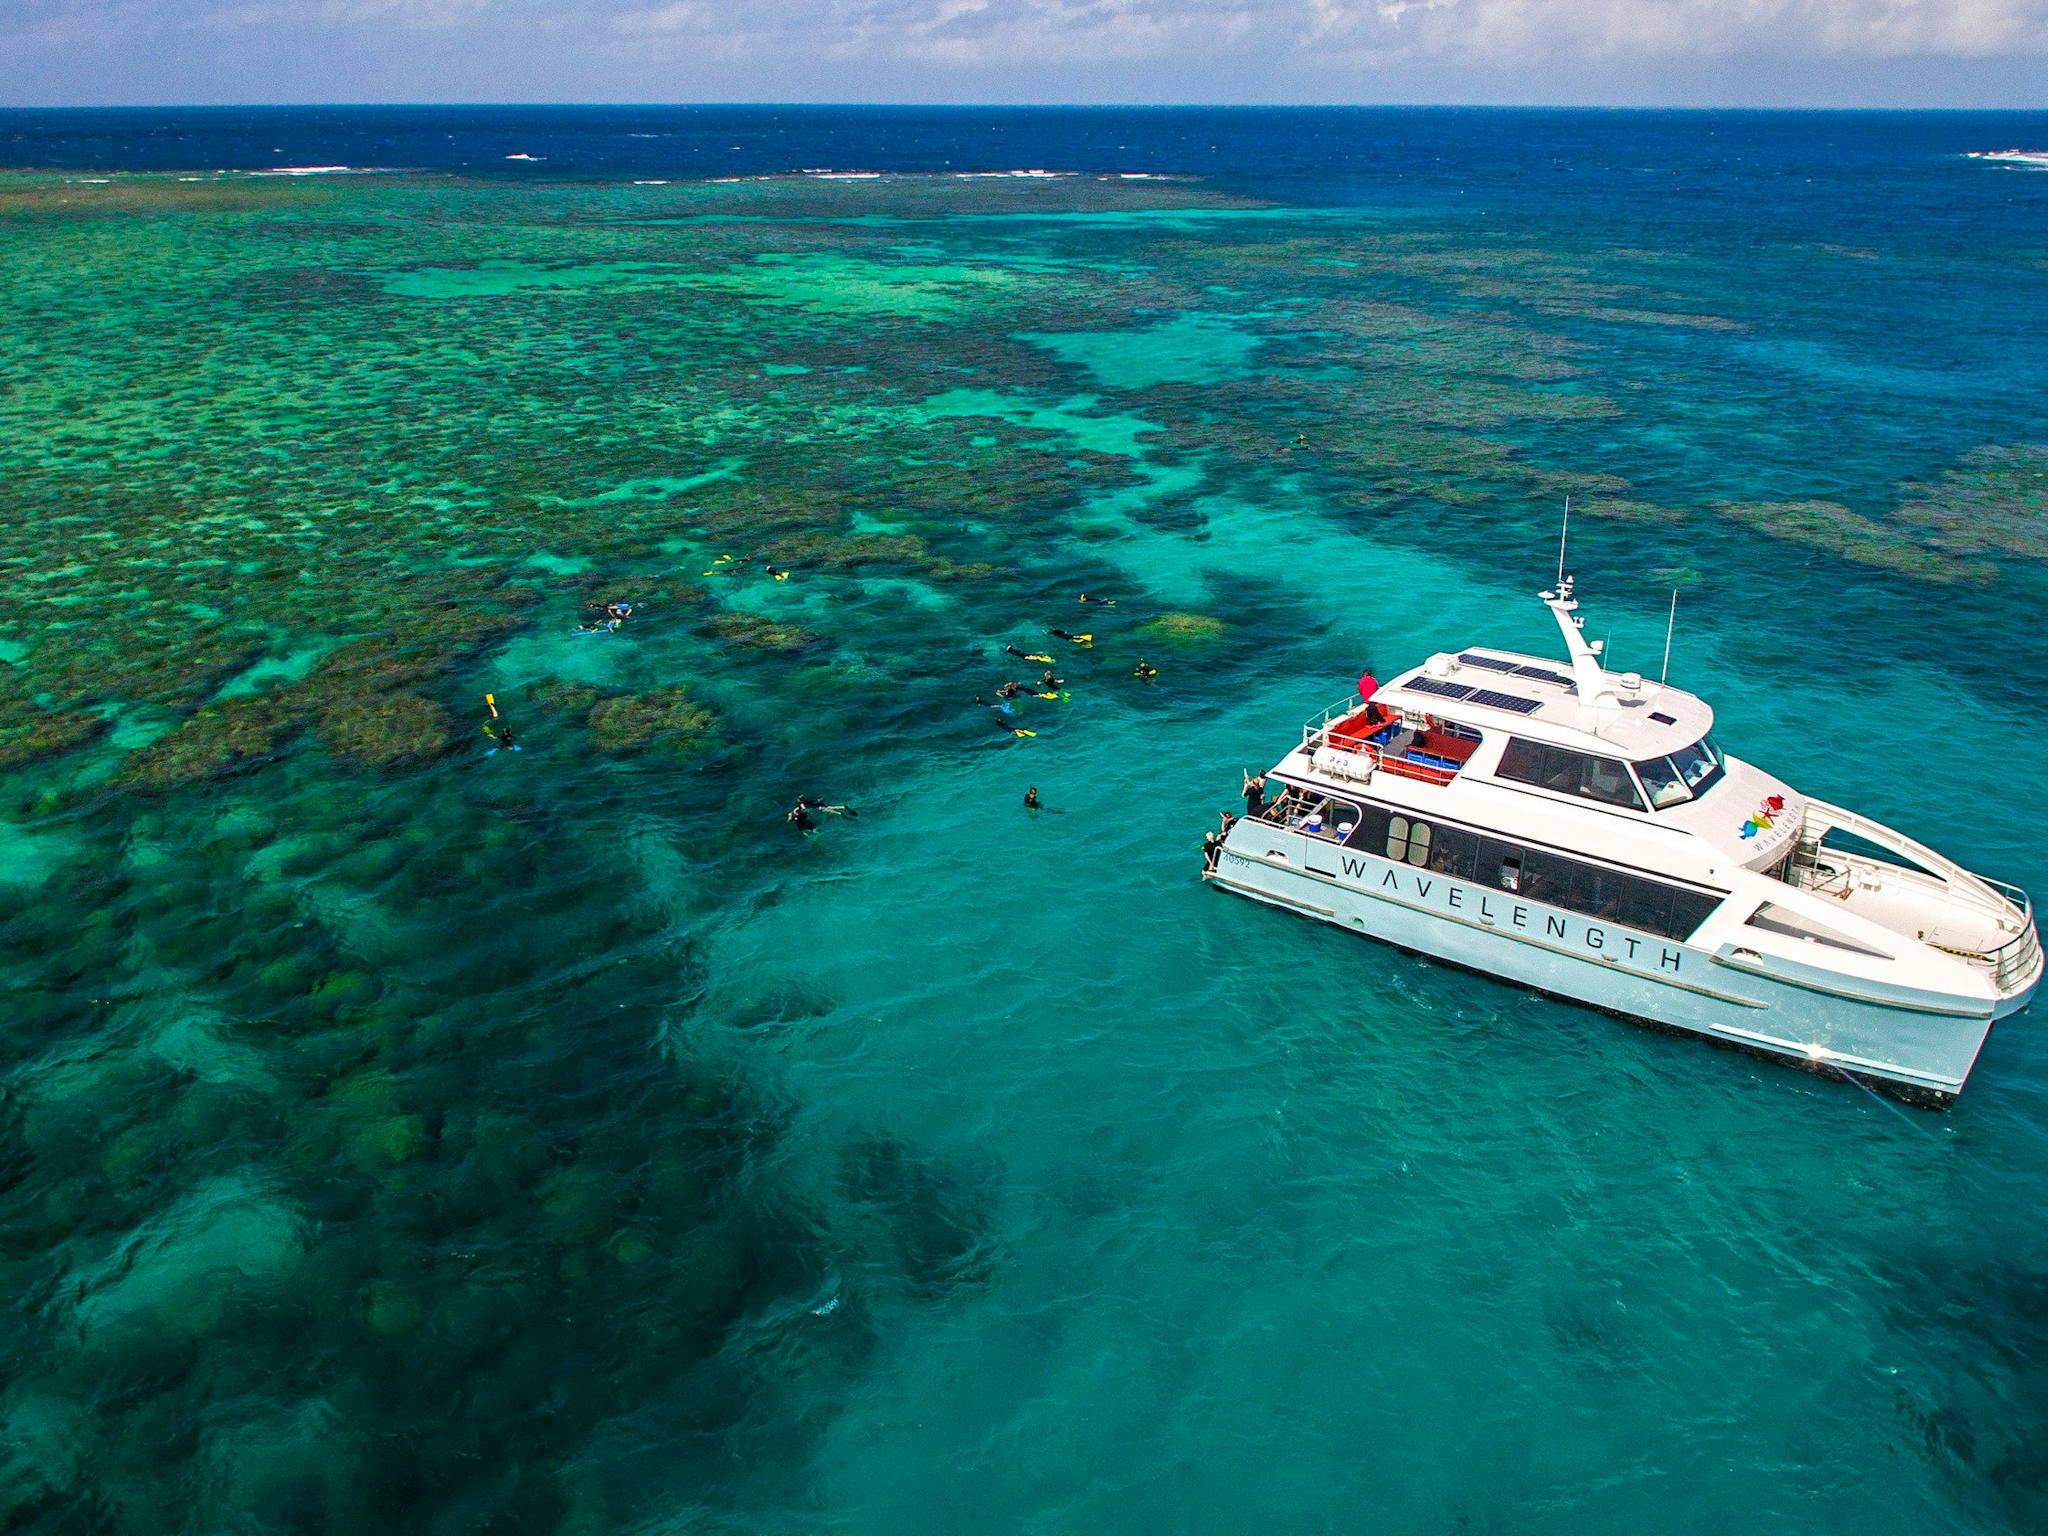 coral reef boat tour